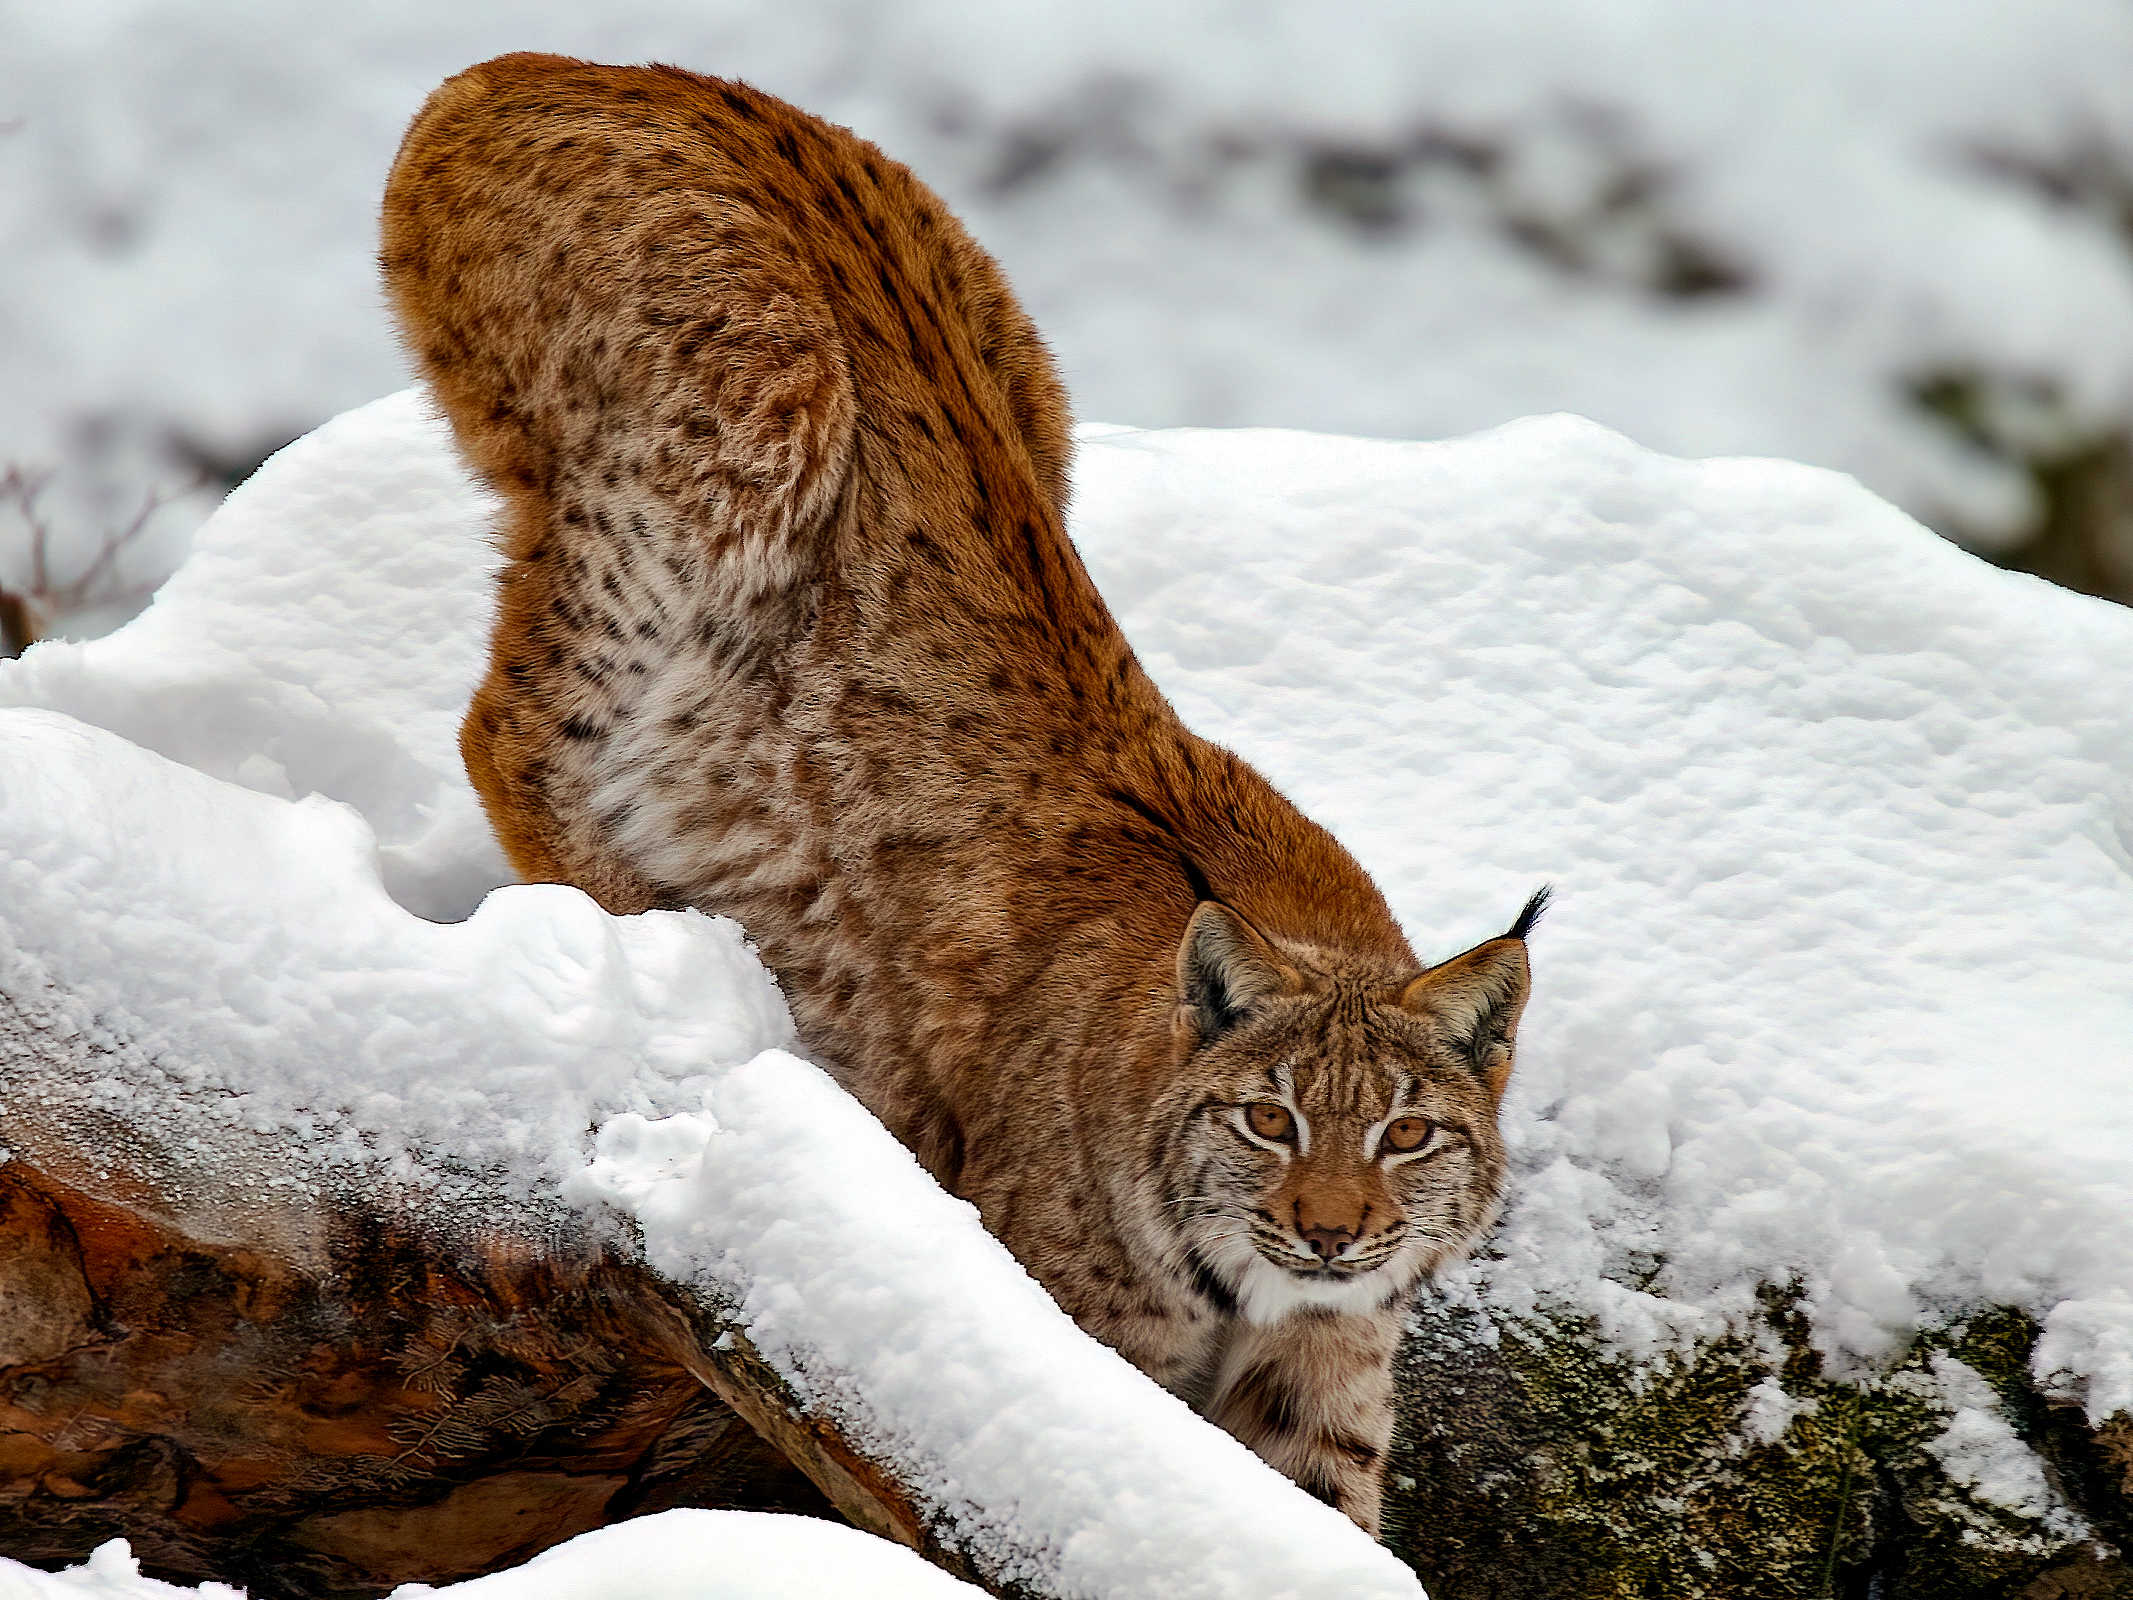 Lince in Baviera...